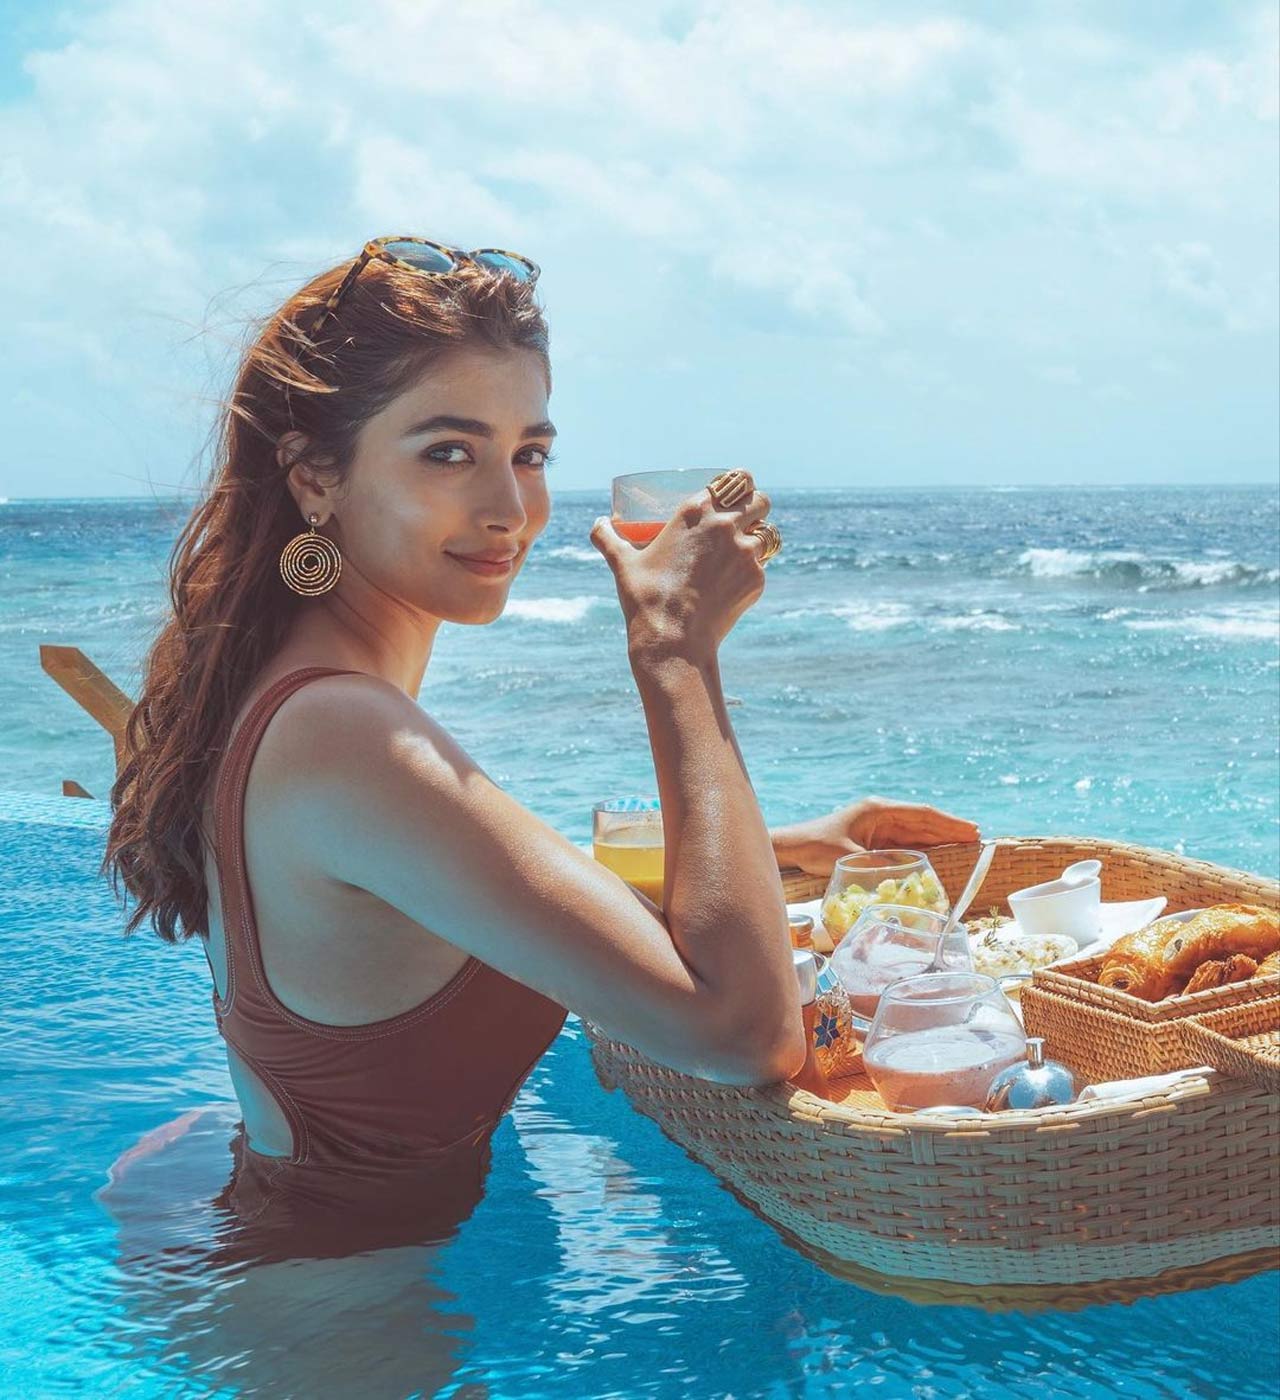 Mouni Roy too opted for a beach vacation but this time it wasn't the Maldives, but Dubai. The actress, who was stuck in the country due to pandemic, is often seen travelling to UAE, chilling as she takes some time off from her busy schedule. Dressing in an orange bikini, she opted for a velvet wraparound during one of her vacations.